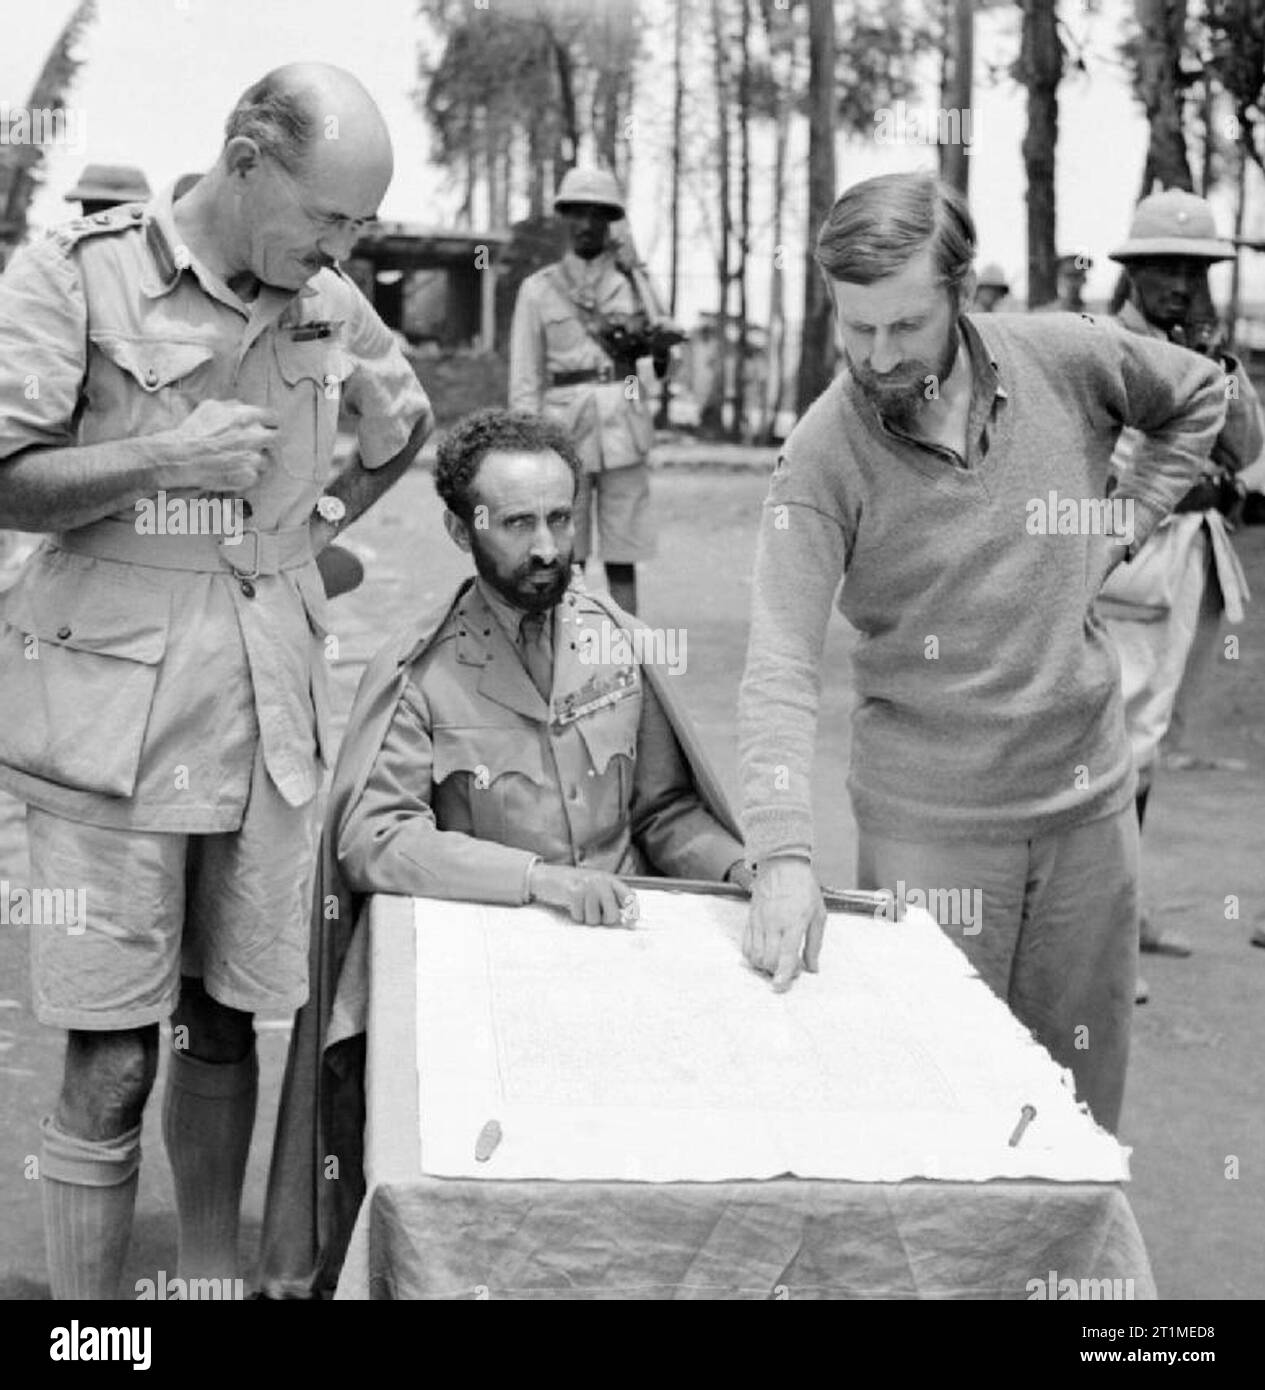 Haile Selassie, Emperor of Abyssinia, with Brigadier Daniel Arthur Sandford (left) and Colonel Wingate (right) in Dambacha Fort, after it had been captured, 15 April 1941. The Emperor of Abyssinia (modern day Ethiopia) with Brigadier Daniel Arthur Sandford on his left and Colonel Wingate on his right, in Dambacha Fort after it had been captured, 15 April 1941. Stock Photo